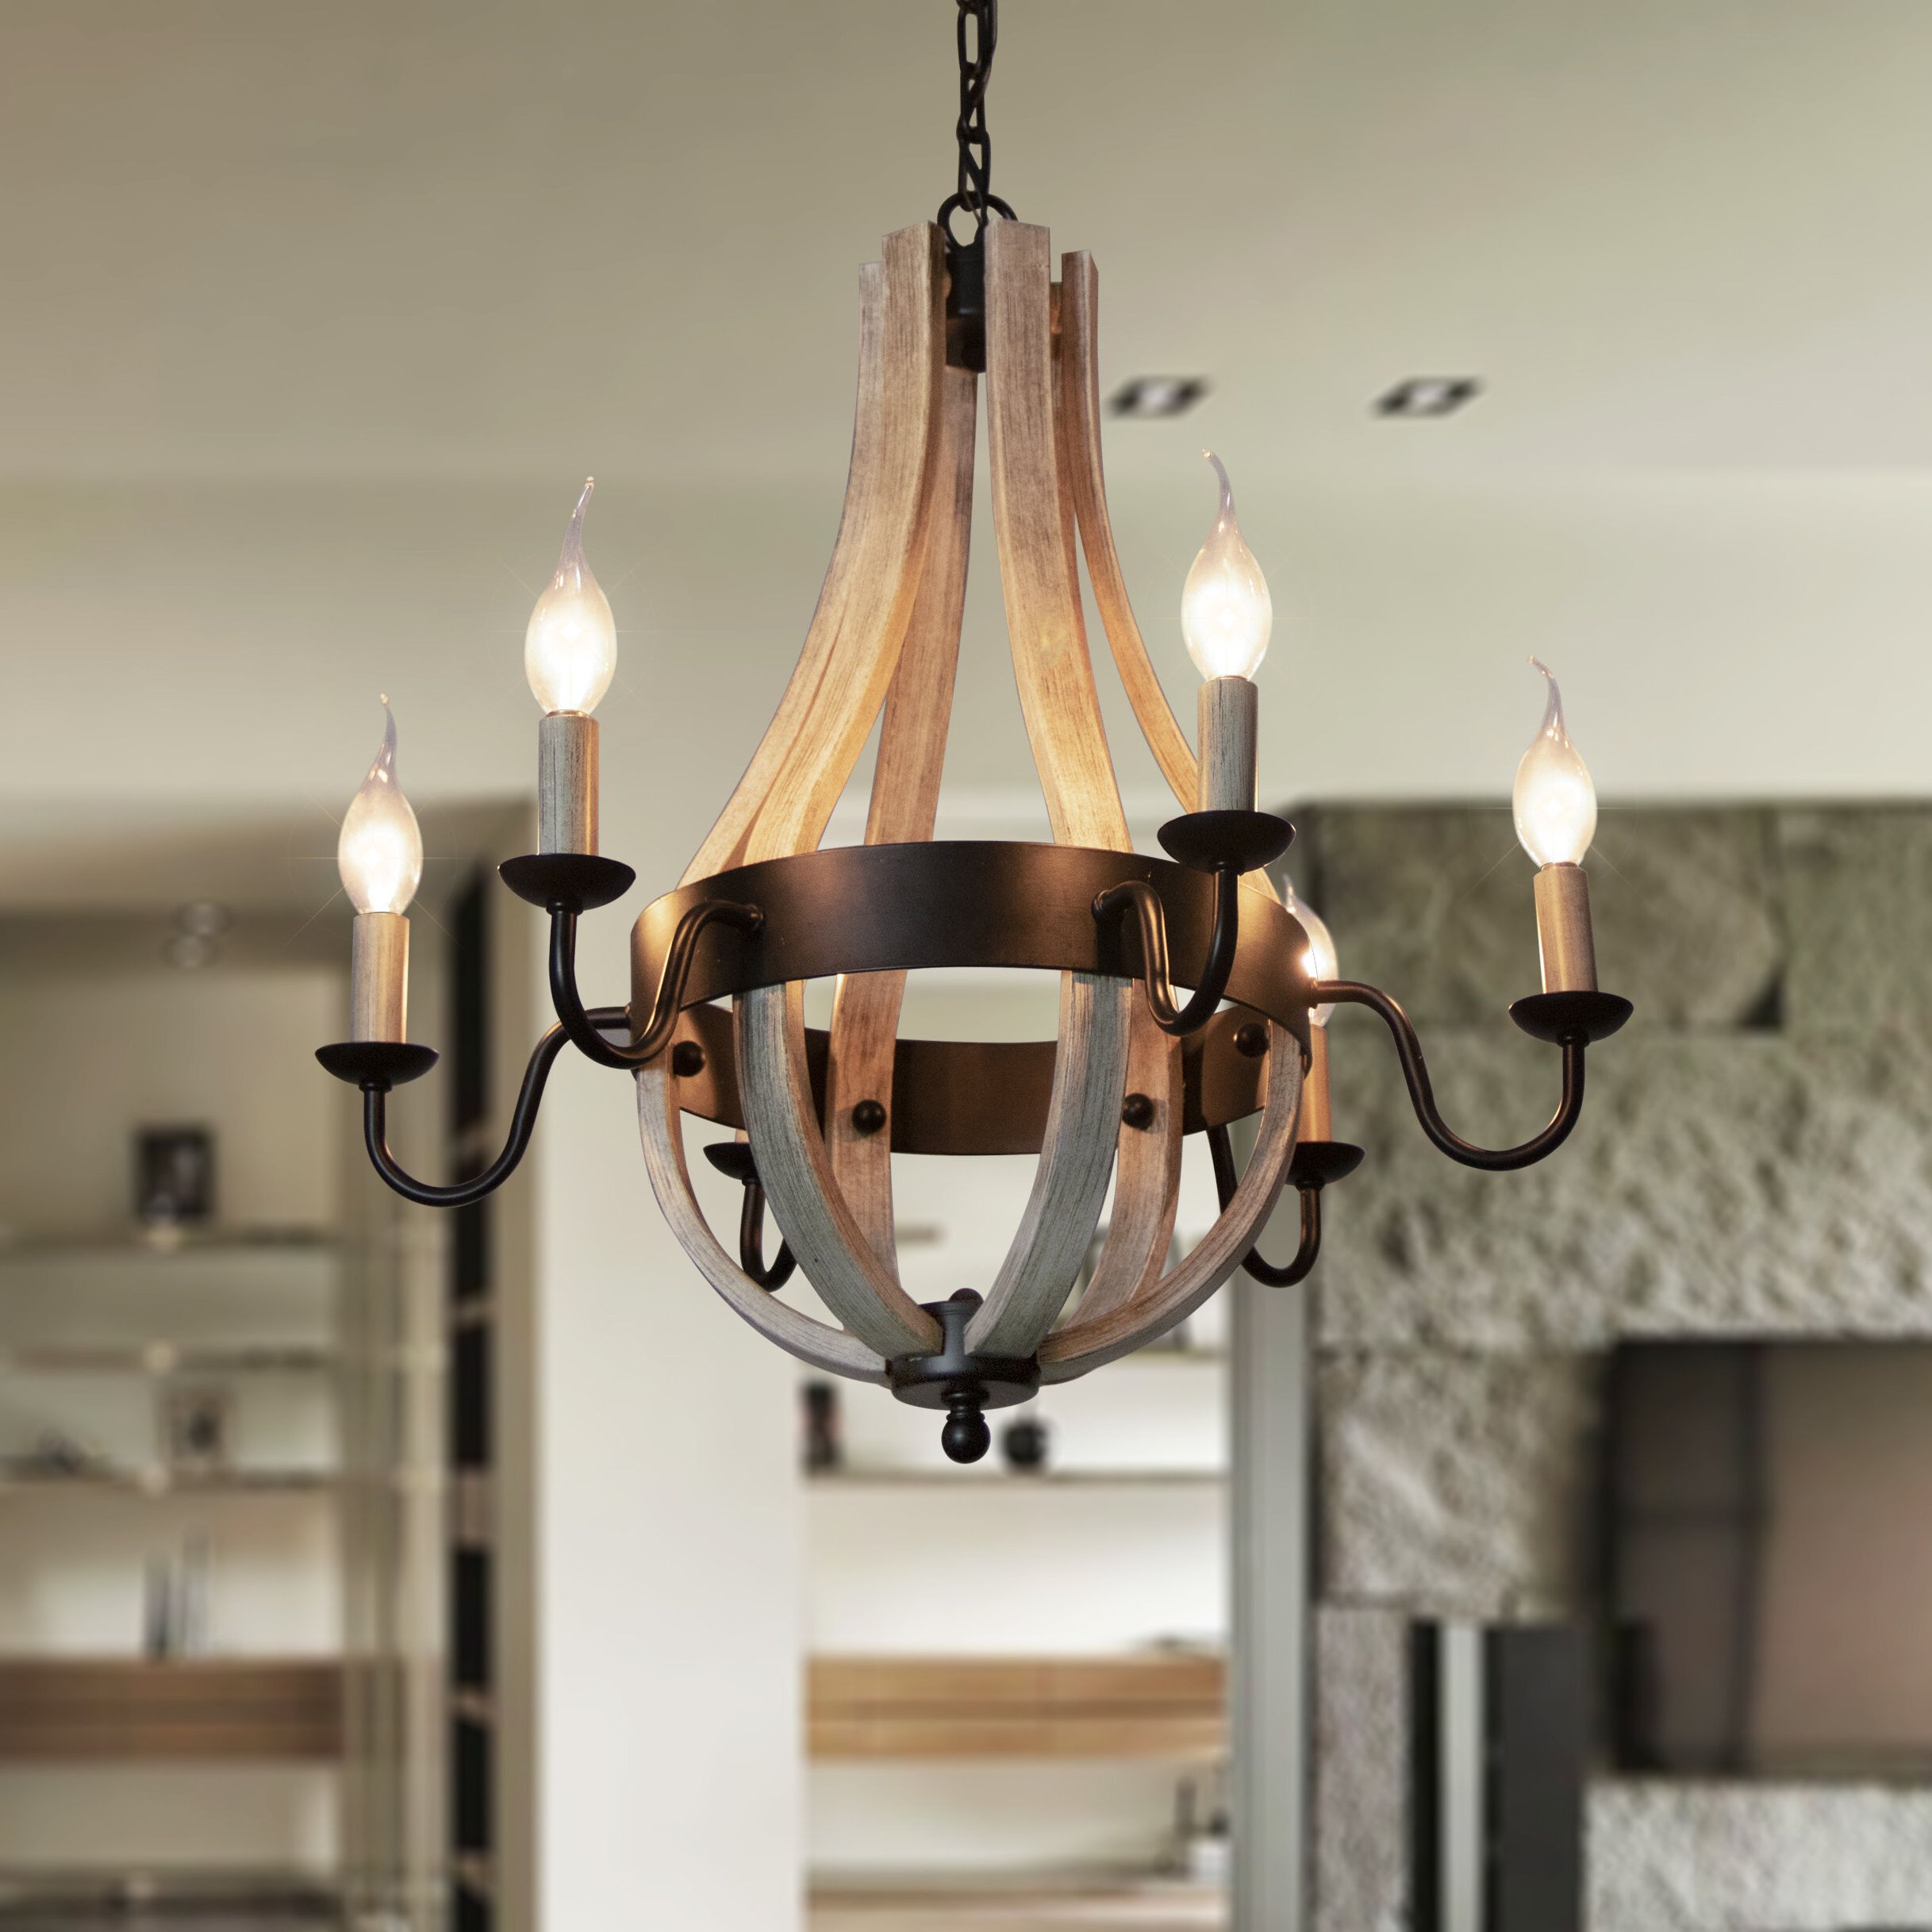 Adan 6 Light Candle Style Chandelier Throughout Latest Phifer 6 Light Empire Chandeliers (View 19 of 25)